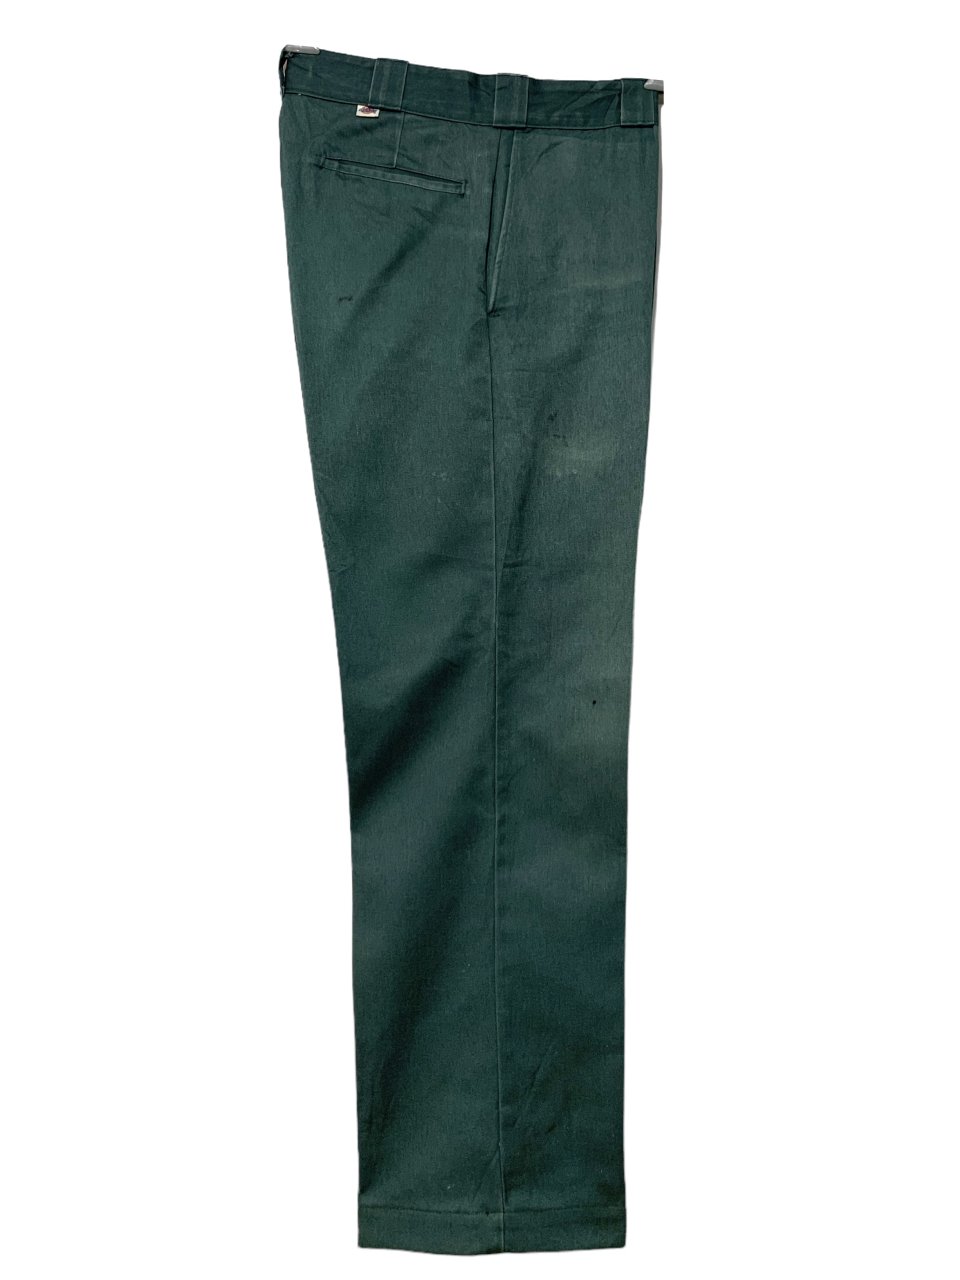 USA製 80s Dickies 874 Work Pants 緑 W32×L30 ディッキーズ ワーク